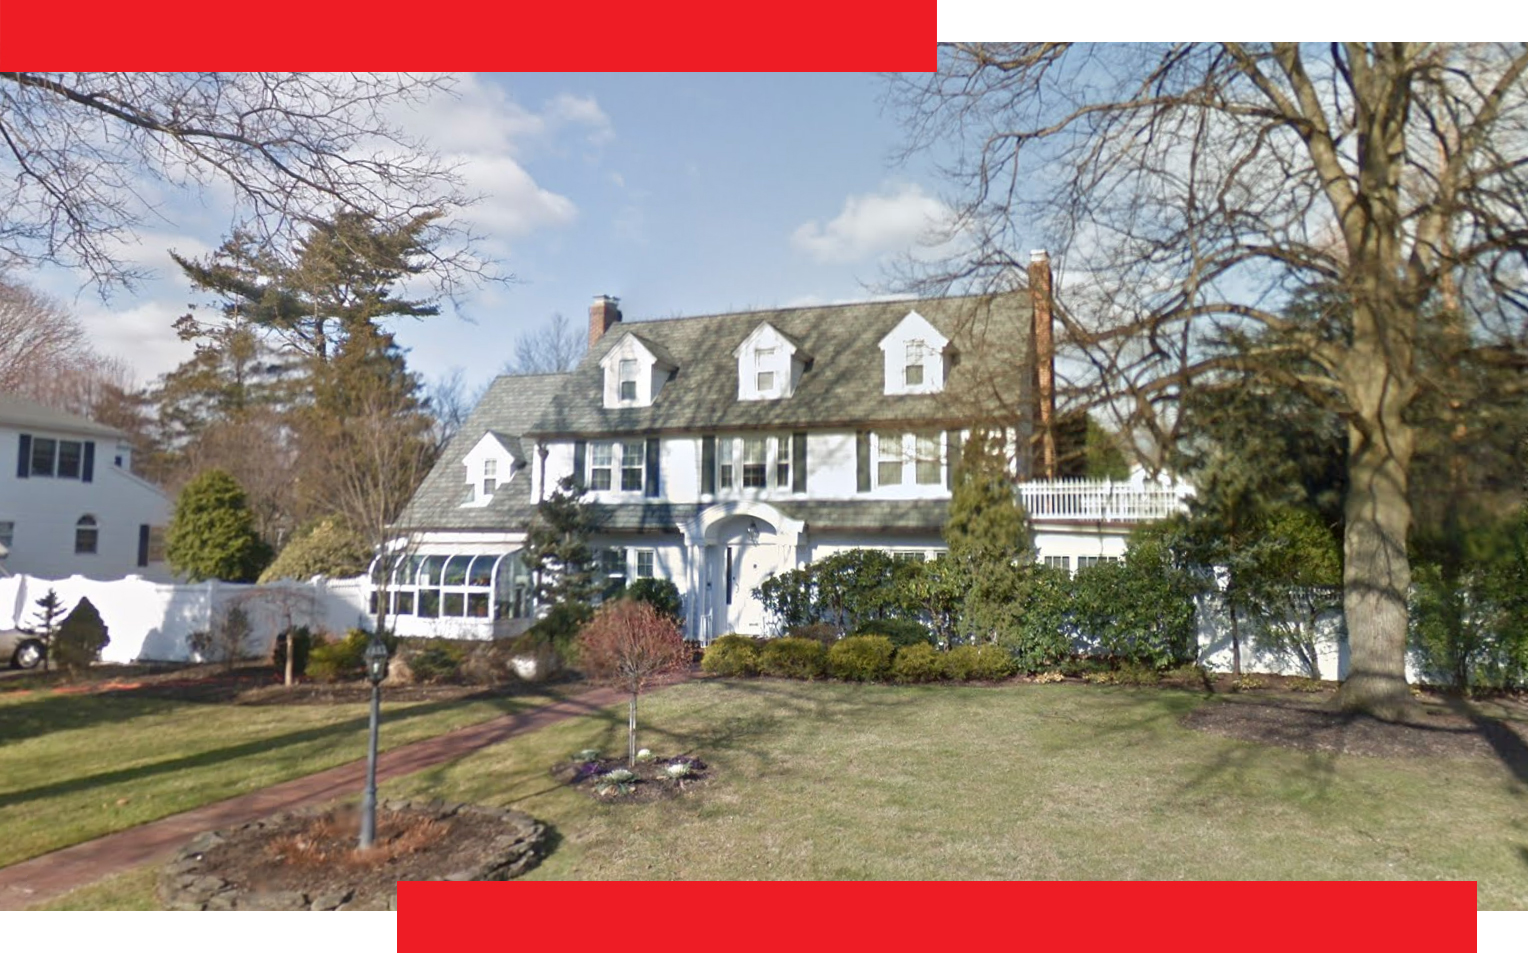 3171 Elm Place in Wantagh (Google Maps)